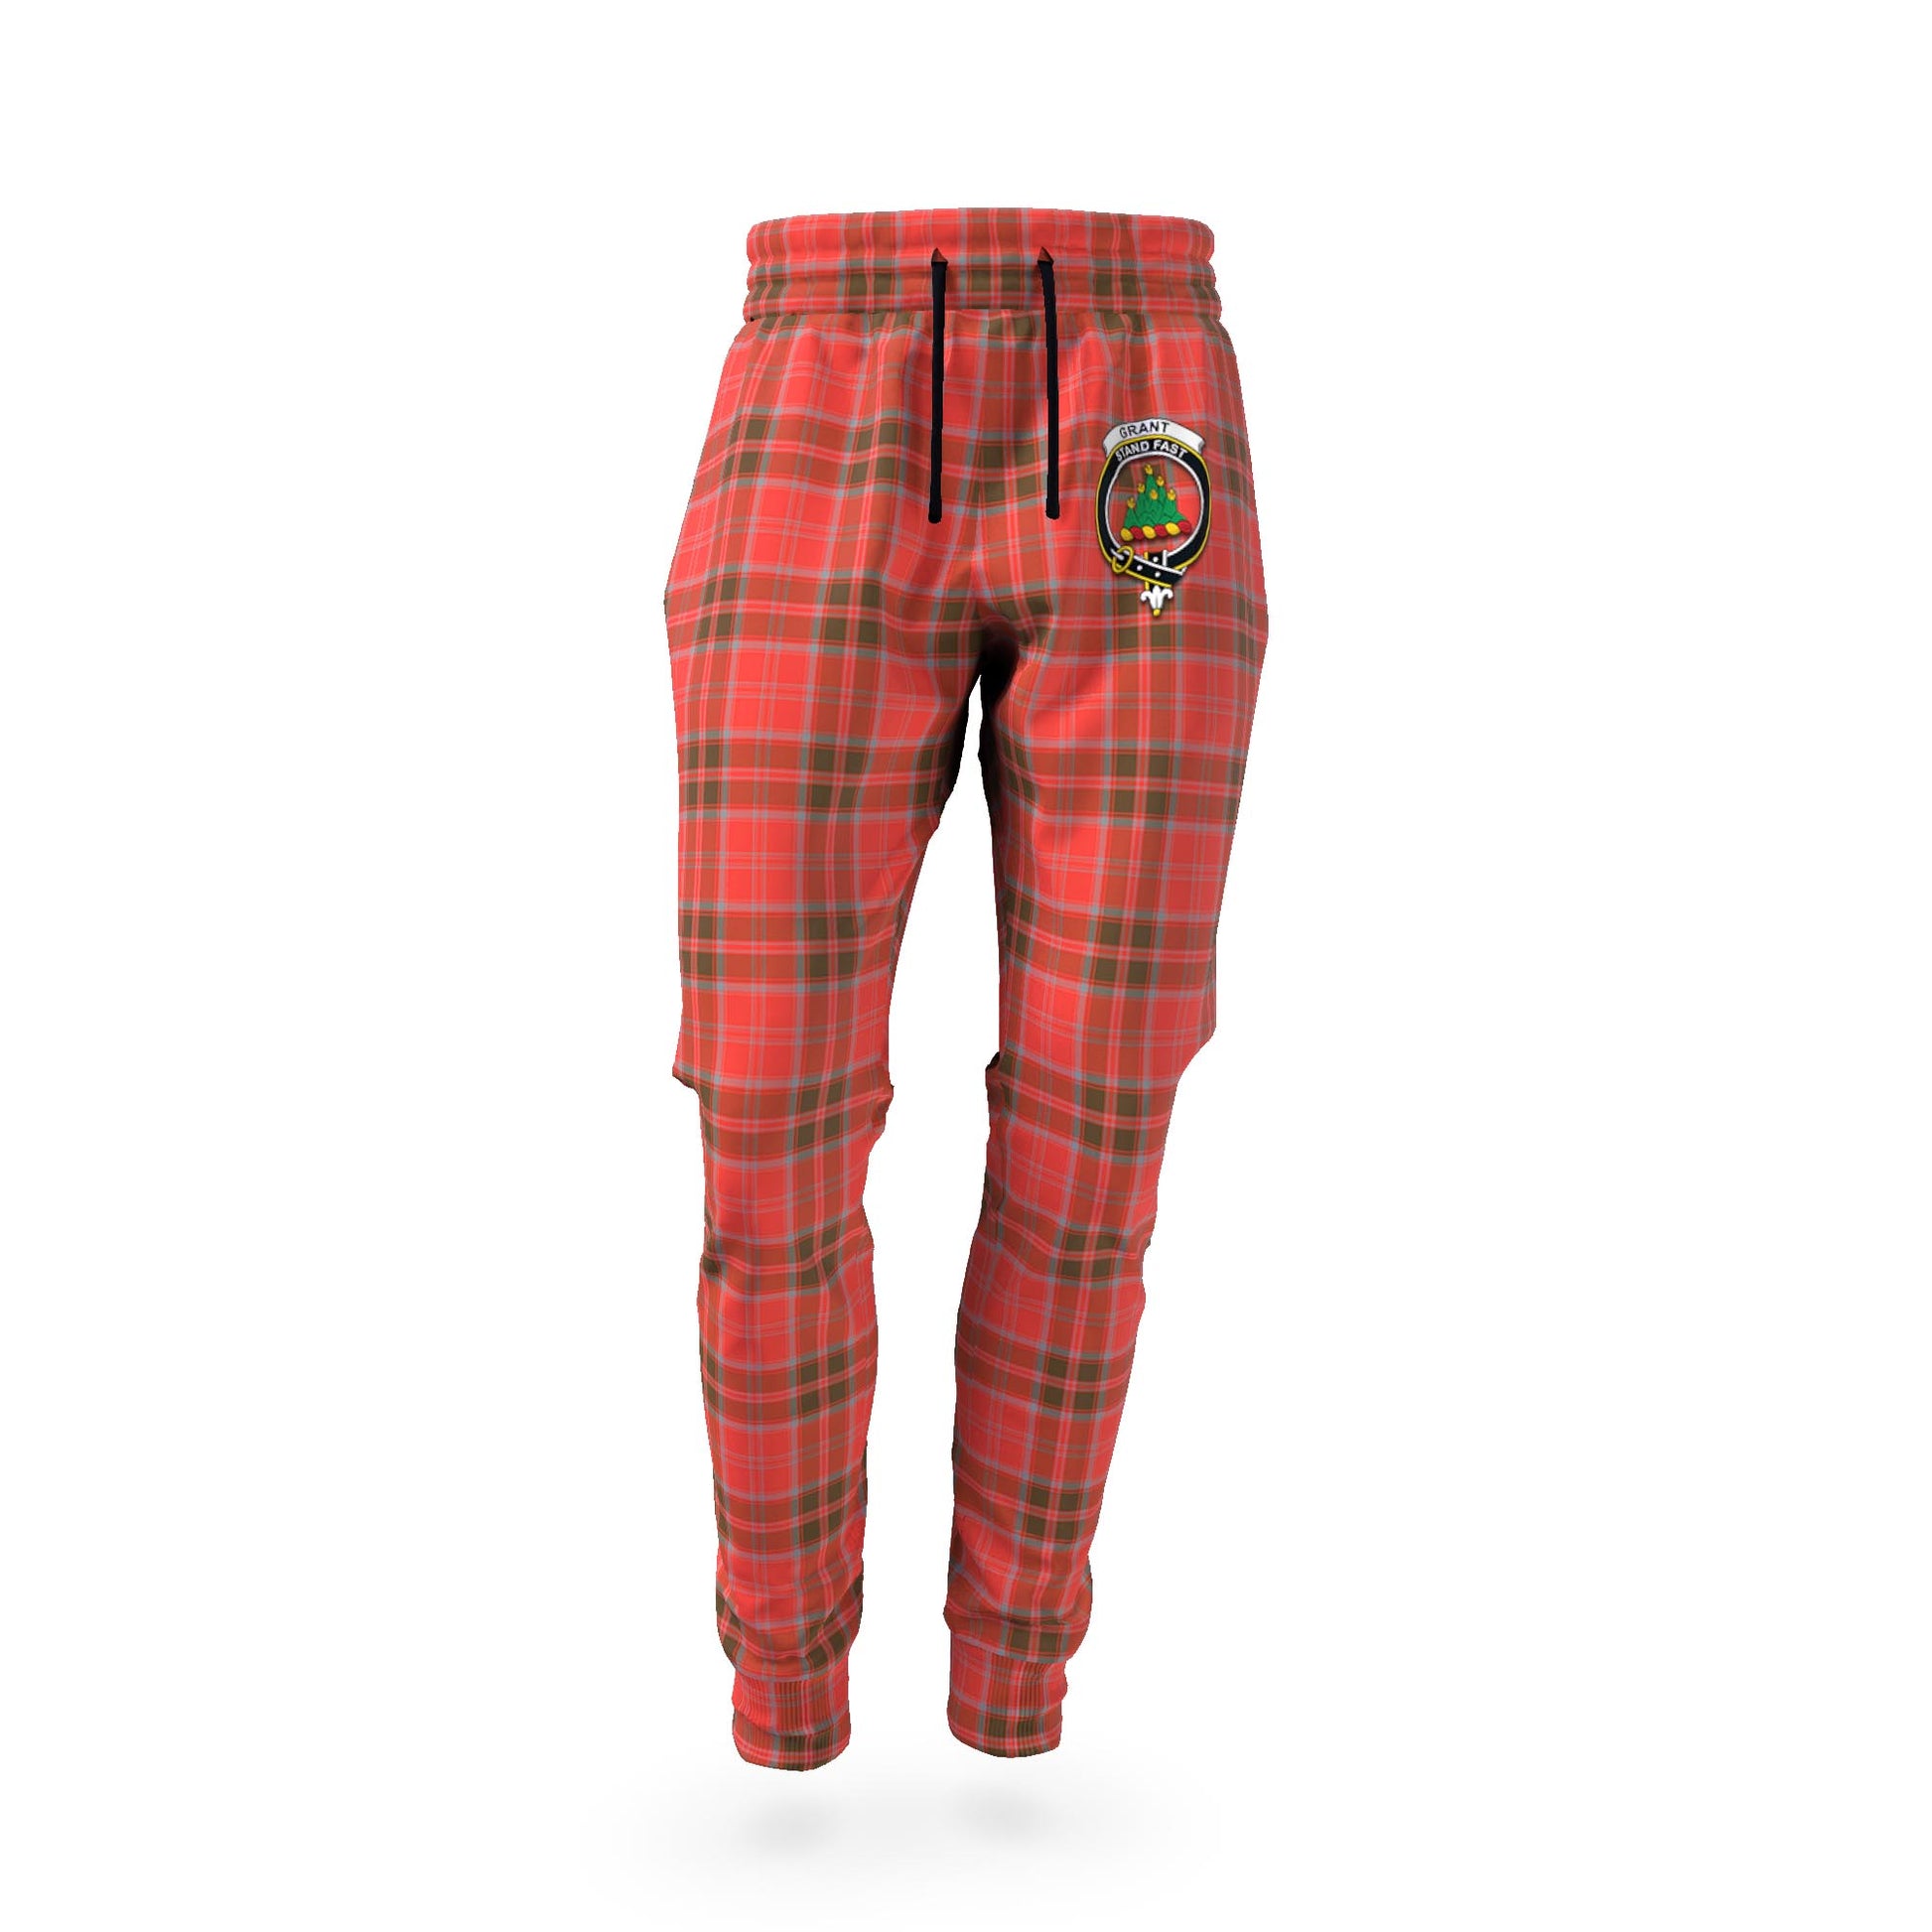 Grant Weathered Tartan Joggers Pants with Family Crest - Tartanvibesclothing